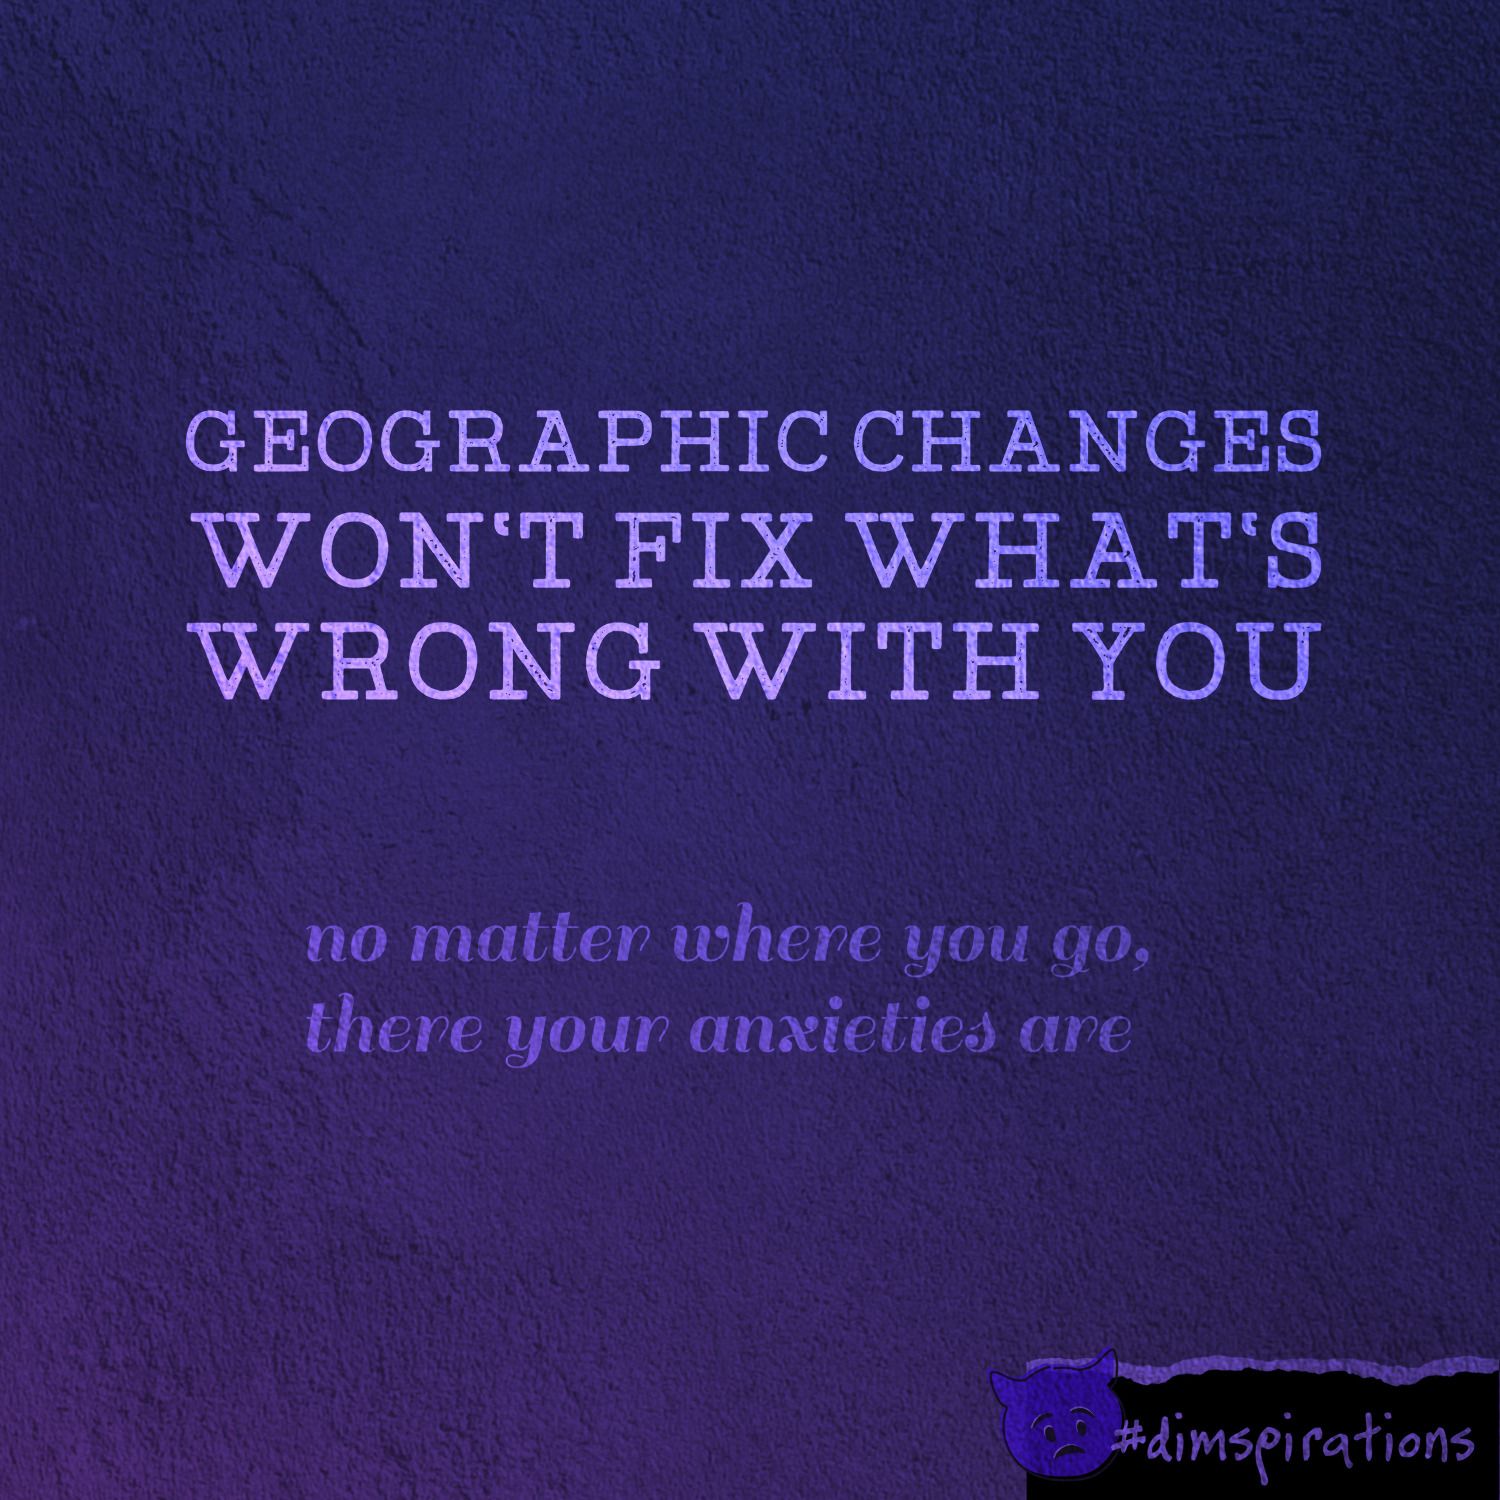 Geographic changes won't fix you. Wherever you go, there your anxieties are.